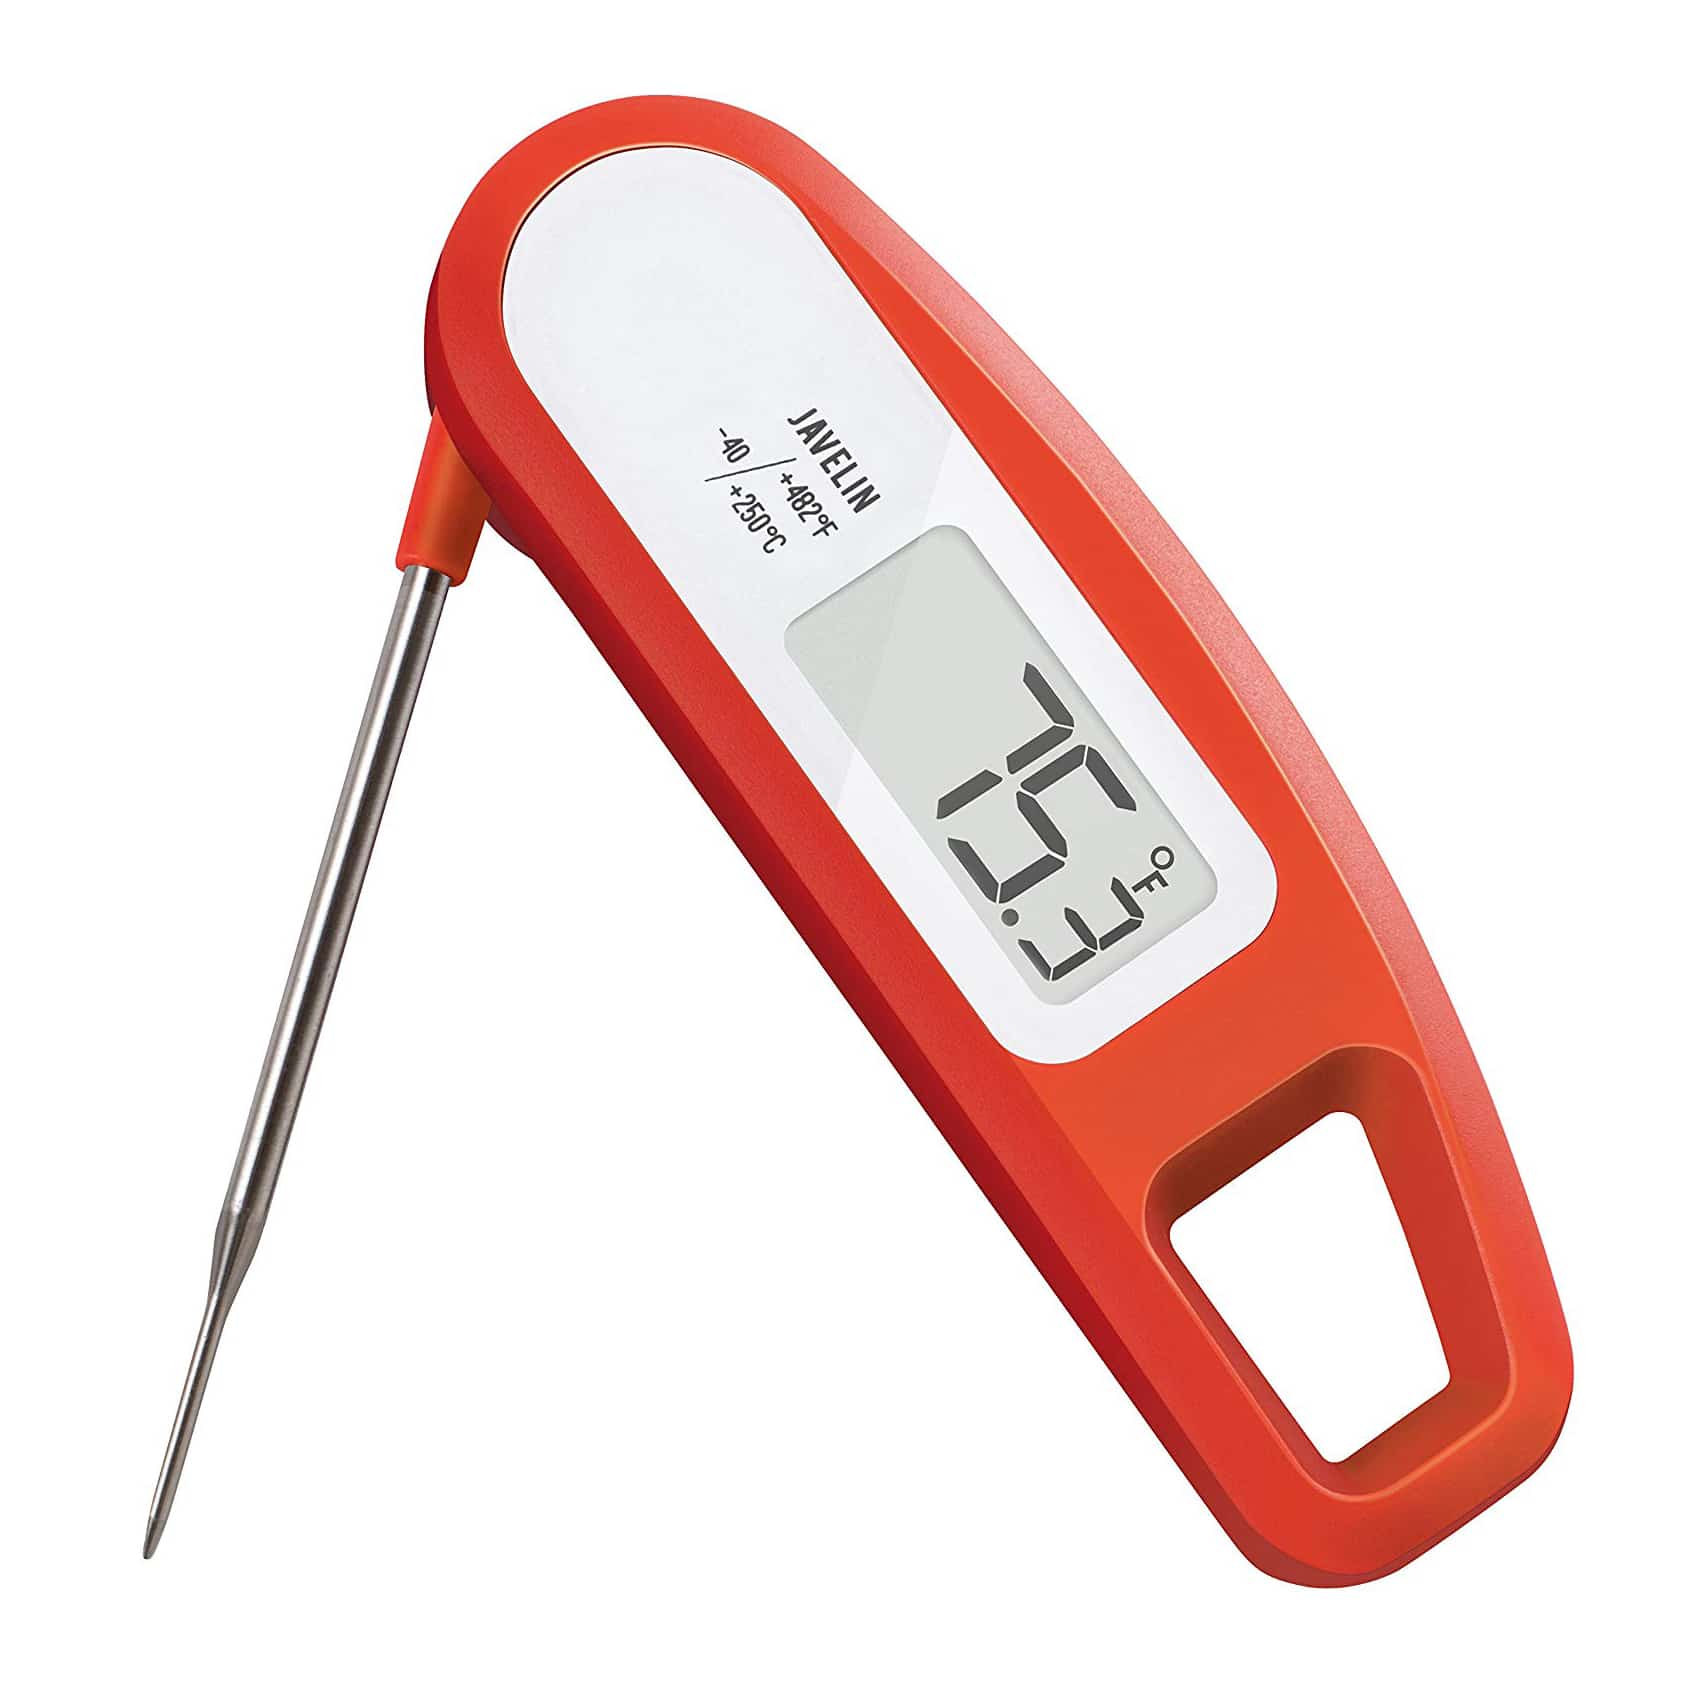 Top 10 Best Meat Thermometers in 2021 Reviews Buyer’s Guide